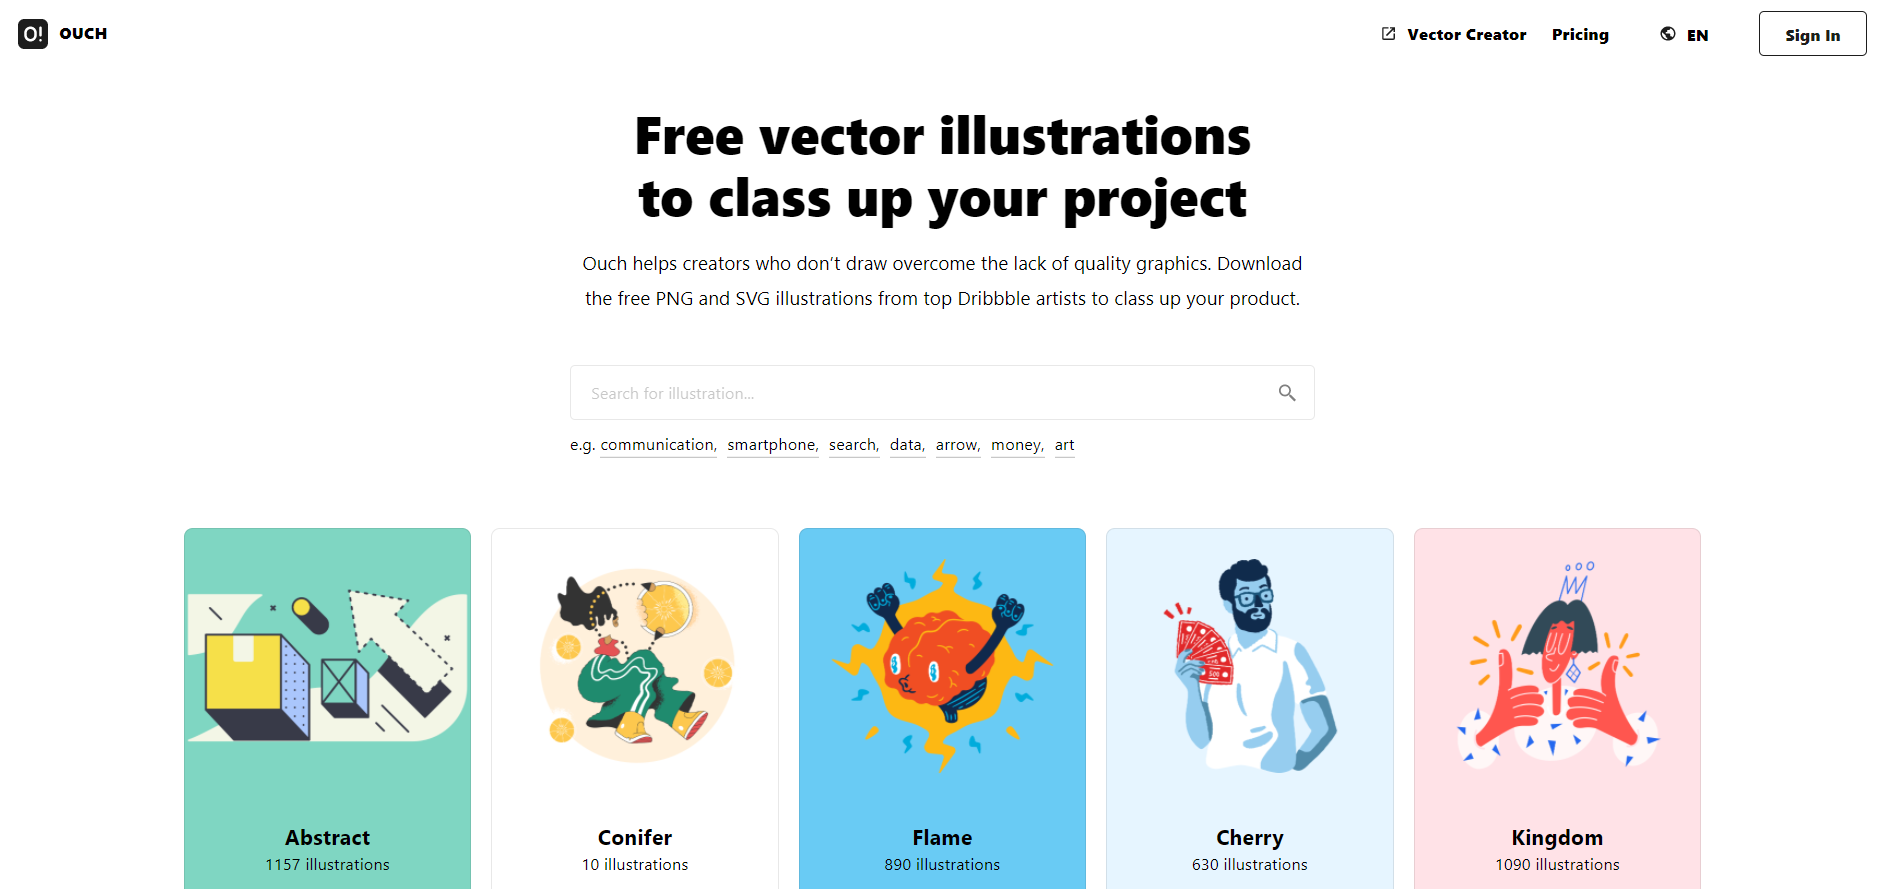 Download 7 Best Illustration Resources To Use In Your Next Project